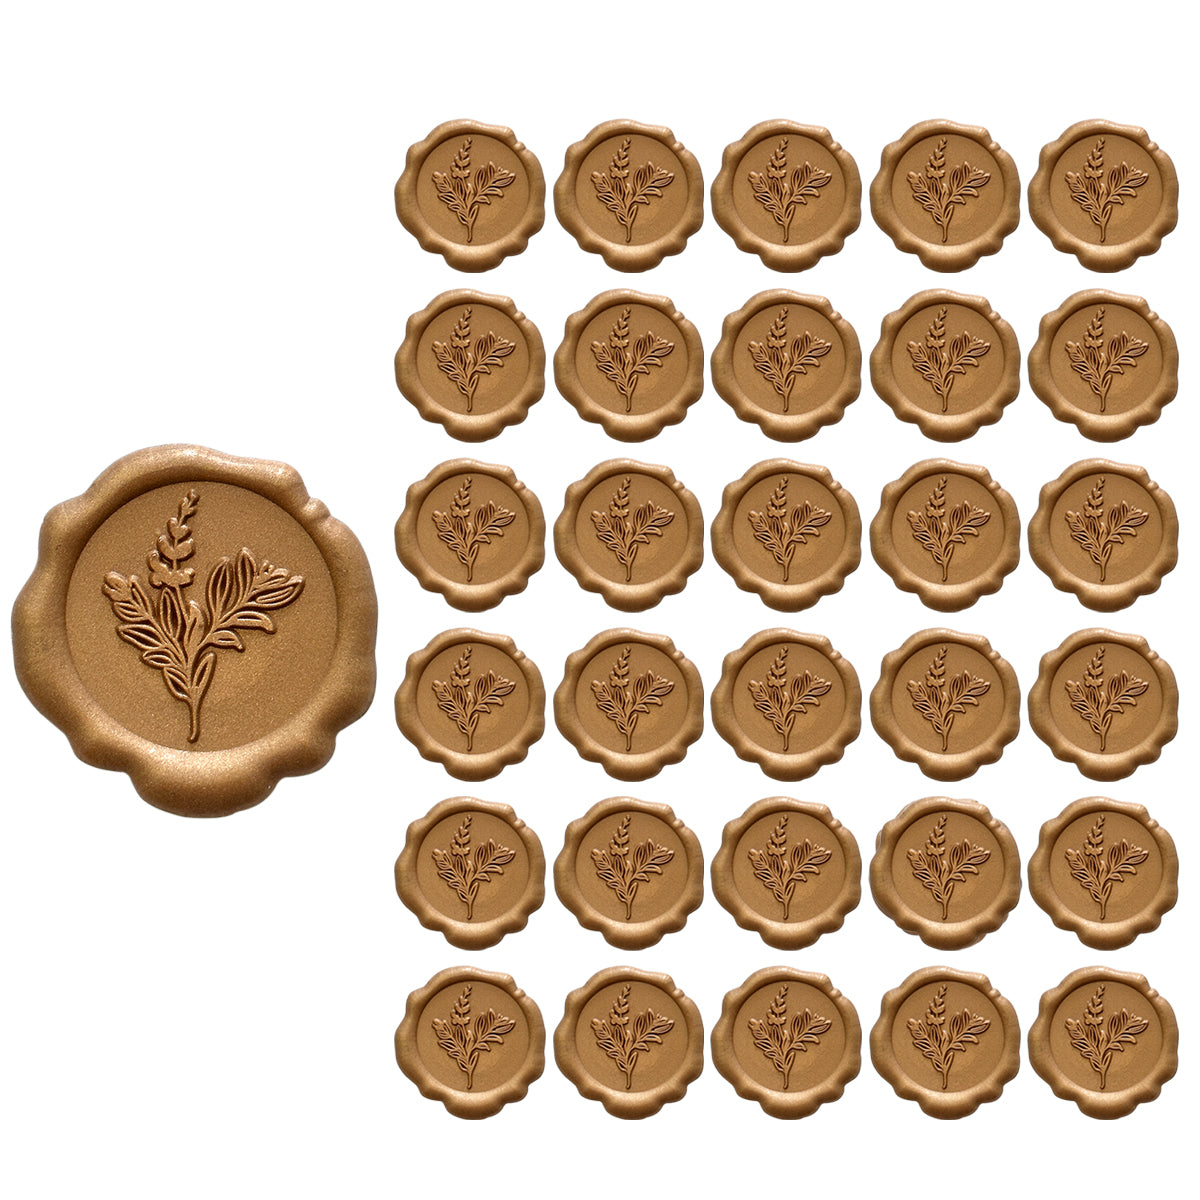 Wrapables Adhesive Wax Seal Stickers for Envelopes, Wedding Invitations, Christmas Packages, Gifts, Parties (30pcs) Bronze Rosemary